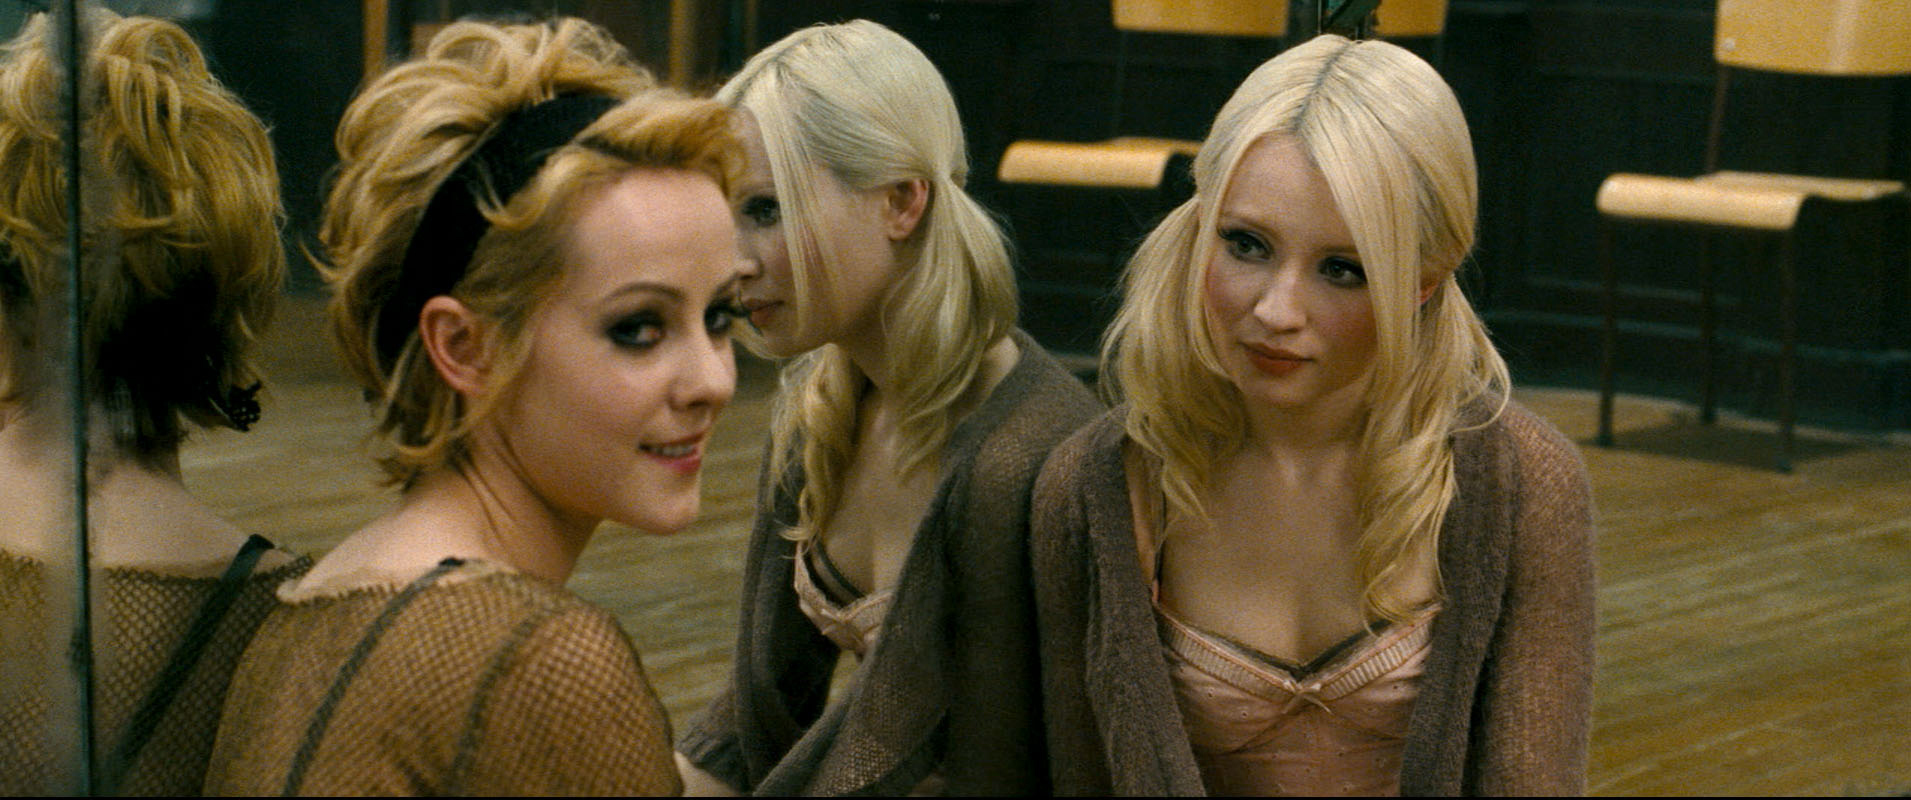 Still of Emily Browning and Jena Malone in Nelauktas smugis (2011)